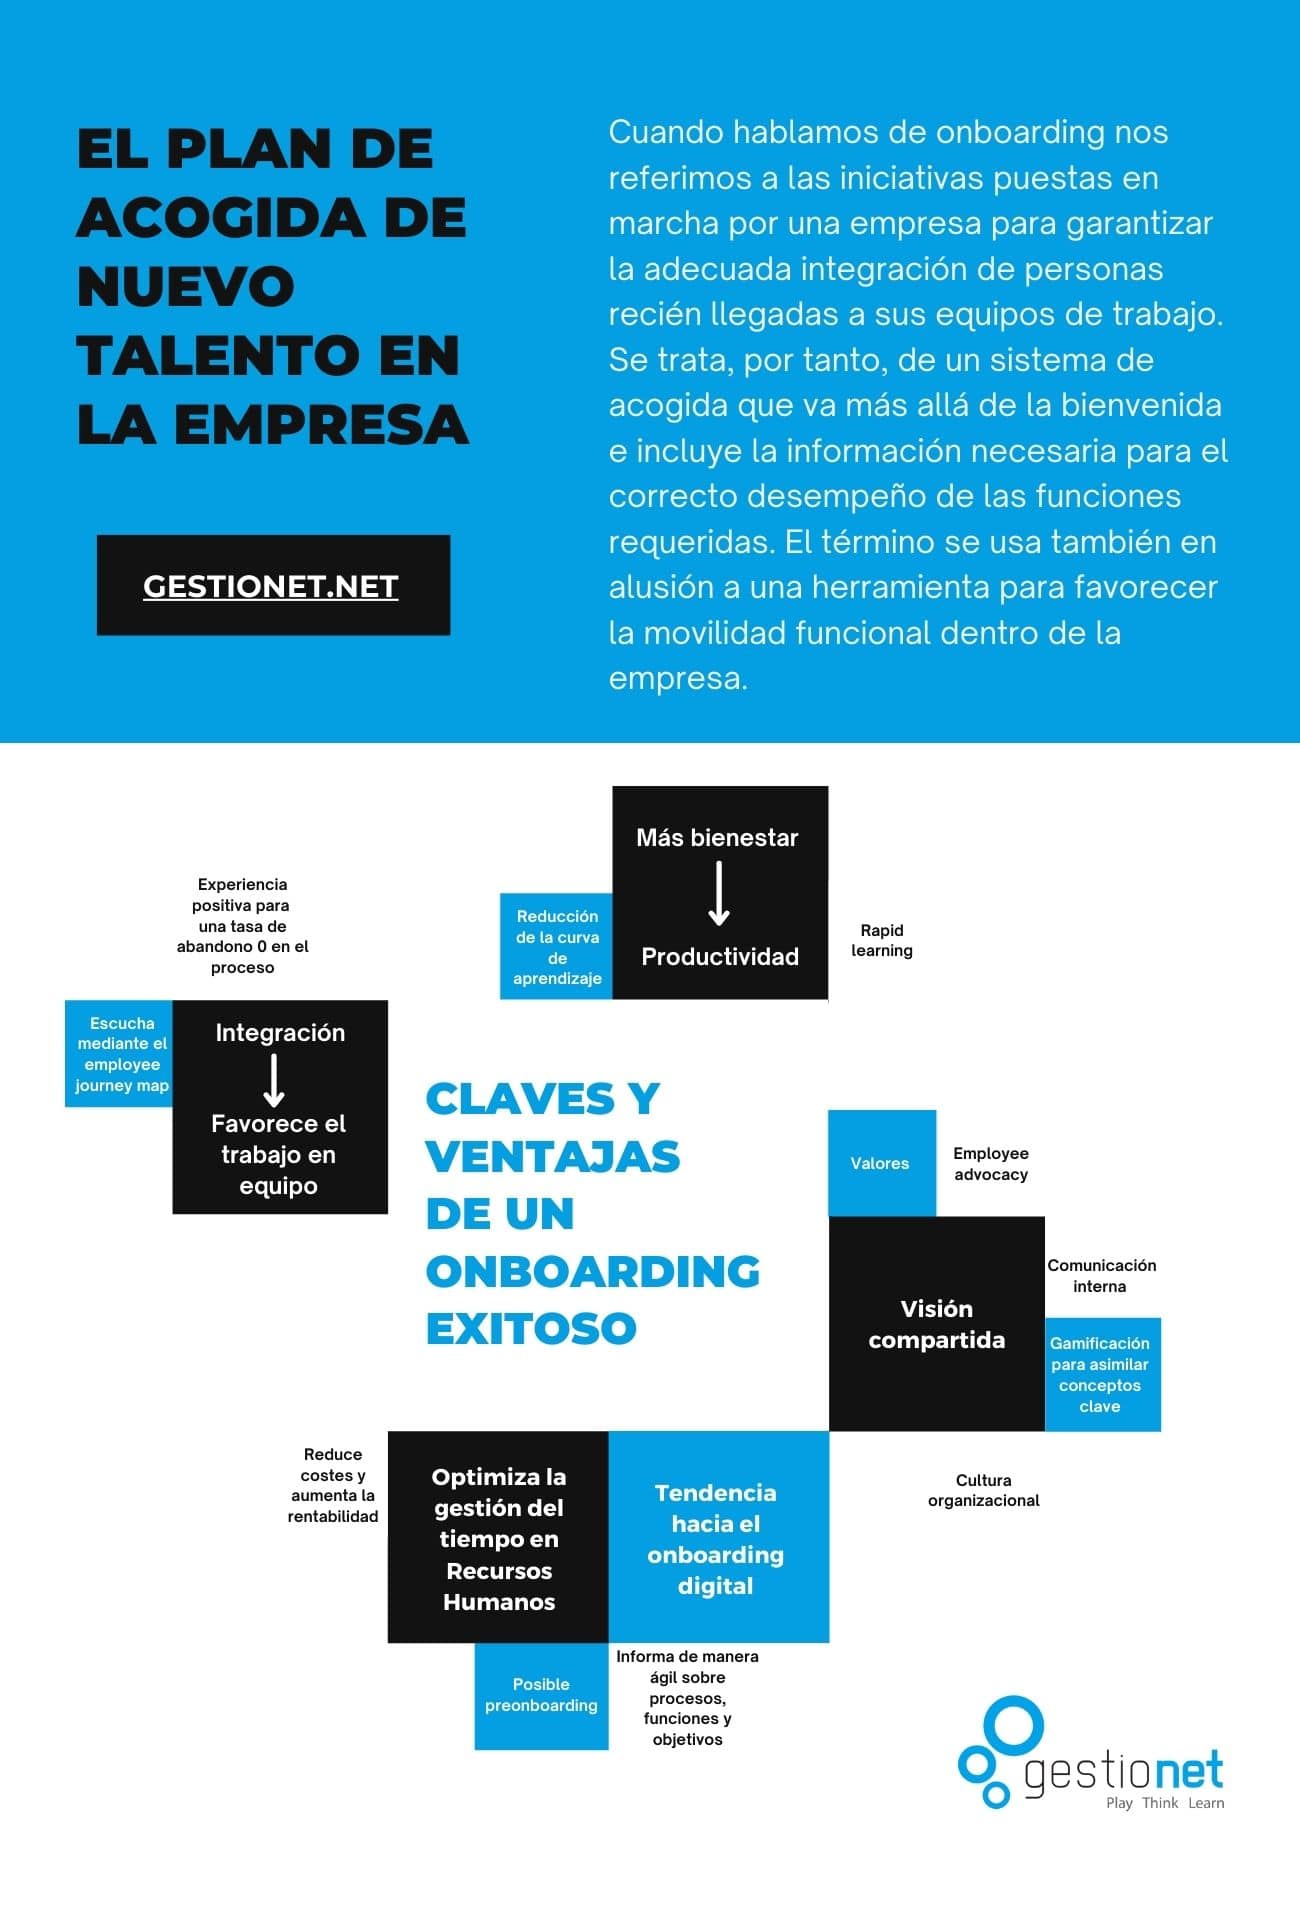 Onboarding exitoso